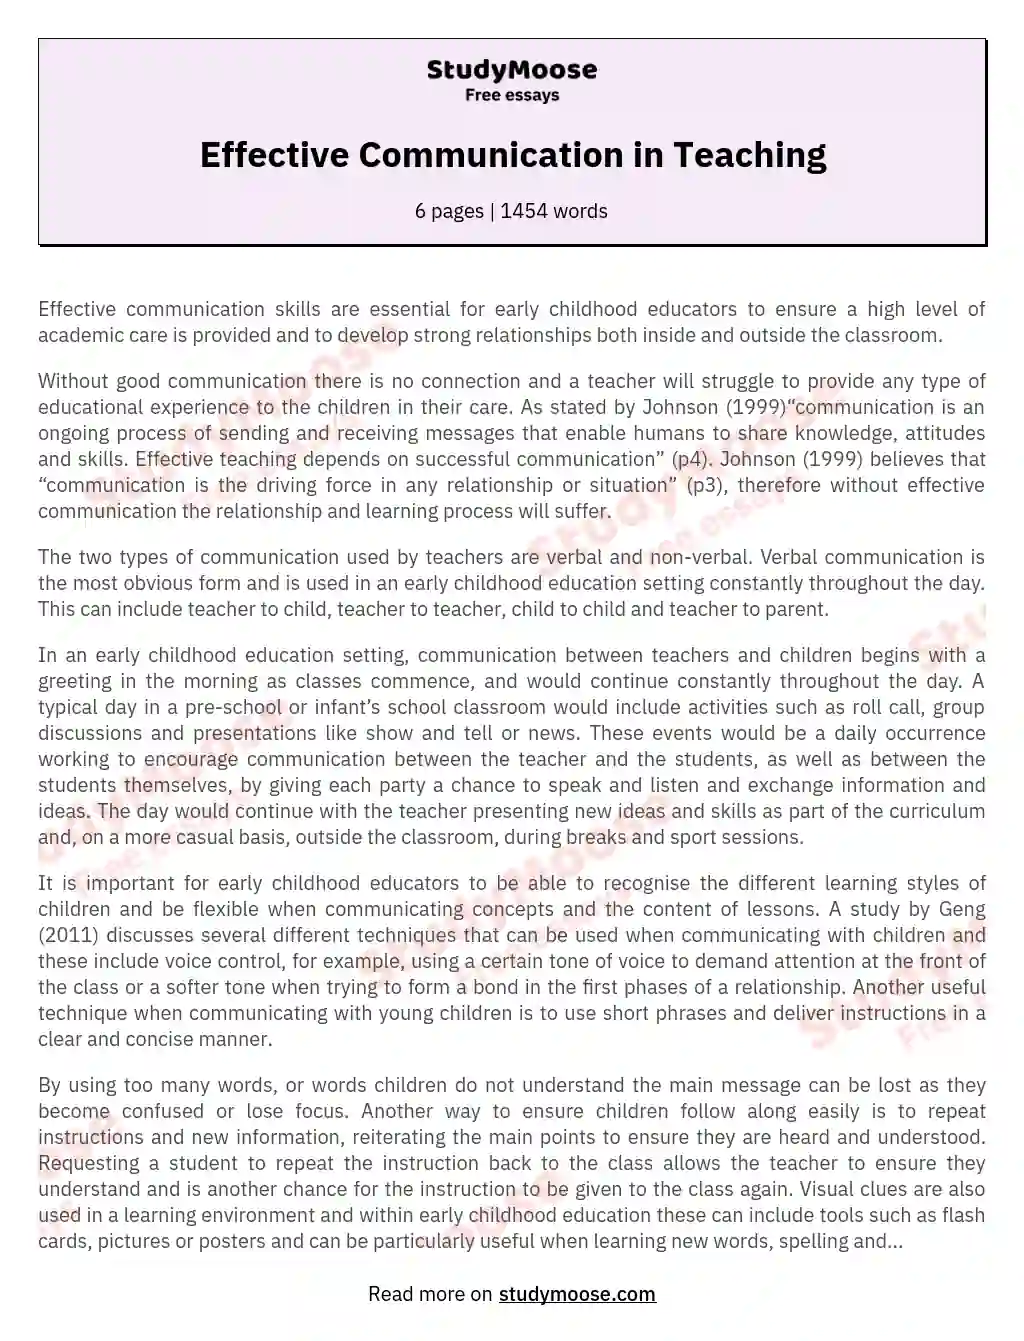 Effective Communication in Teaching essay